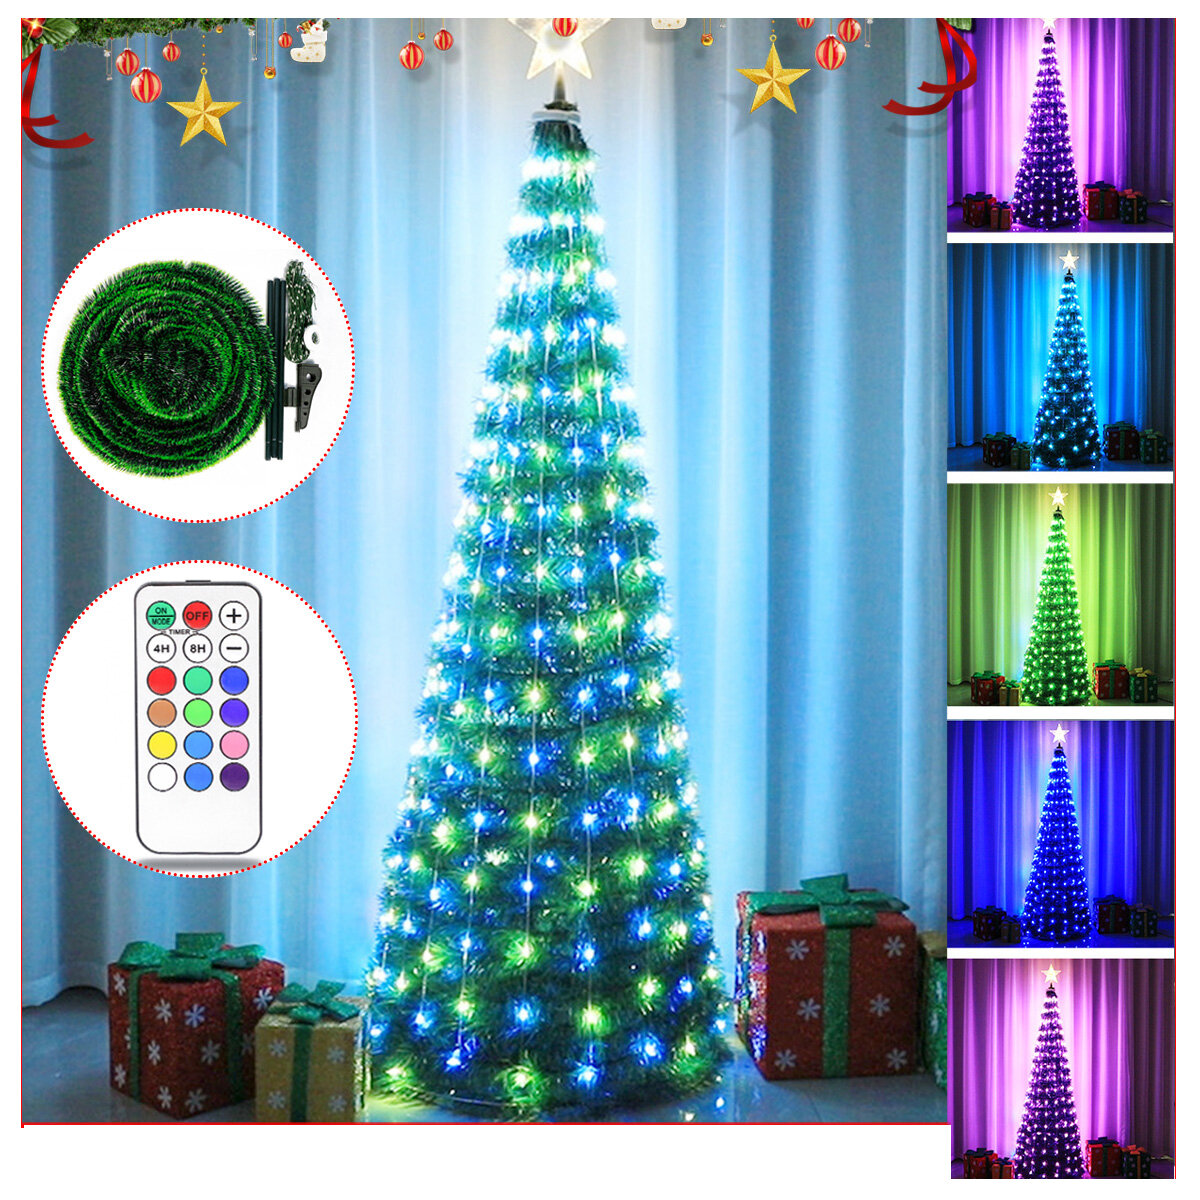 2020 Christmas Tree with Light String Light String Remote Control LED String Lights for Home Christmas Decoration